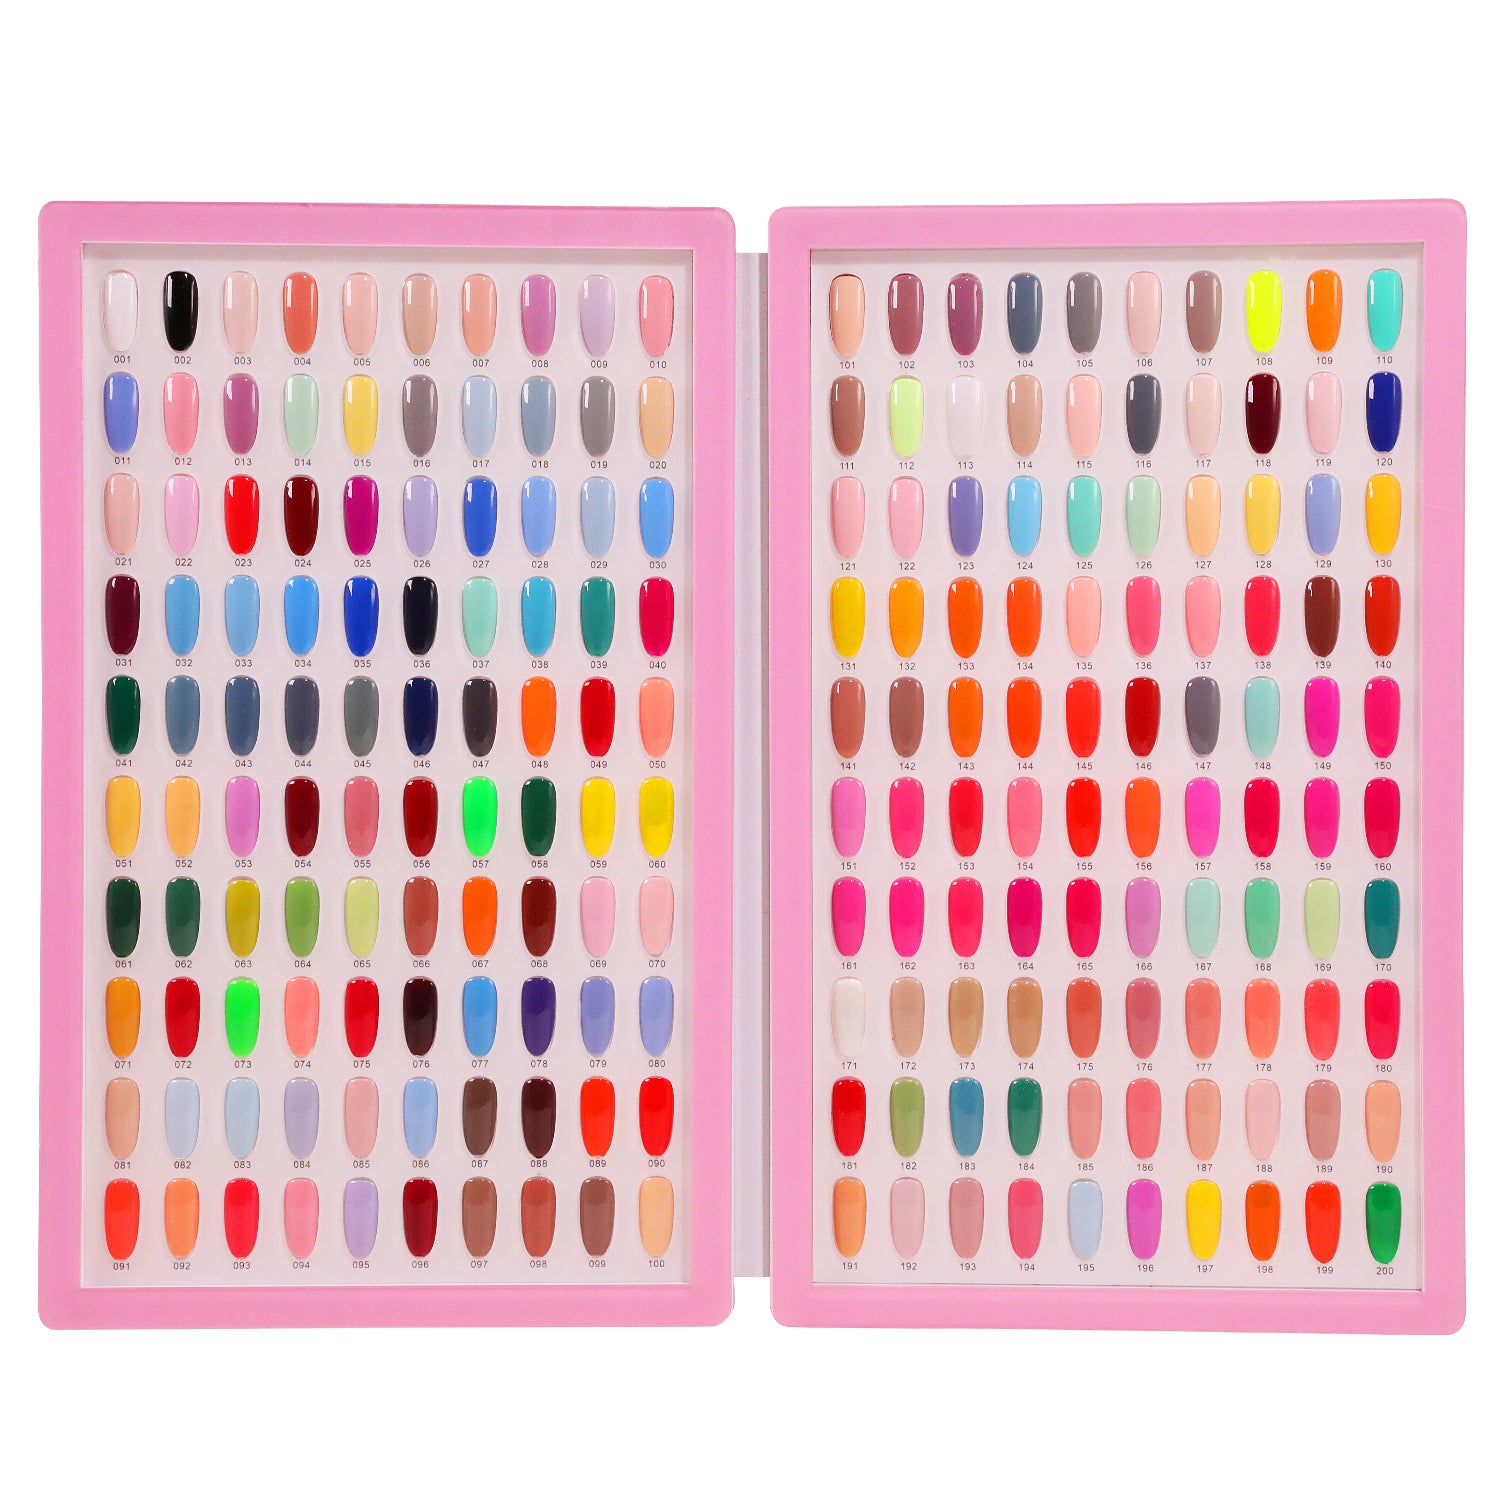 Buy Noverlife 126 Nail Colors Display Cardbook, Nail Gel Polish Display  Chart with Tips, Professional Nail Samples Swatches Book Nail Practice  Design Board for DIY Nail Art Salons Set Online at Lowest